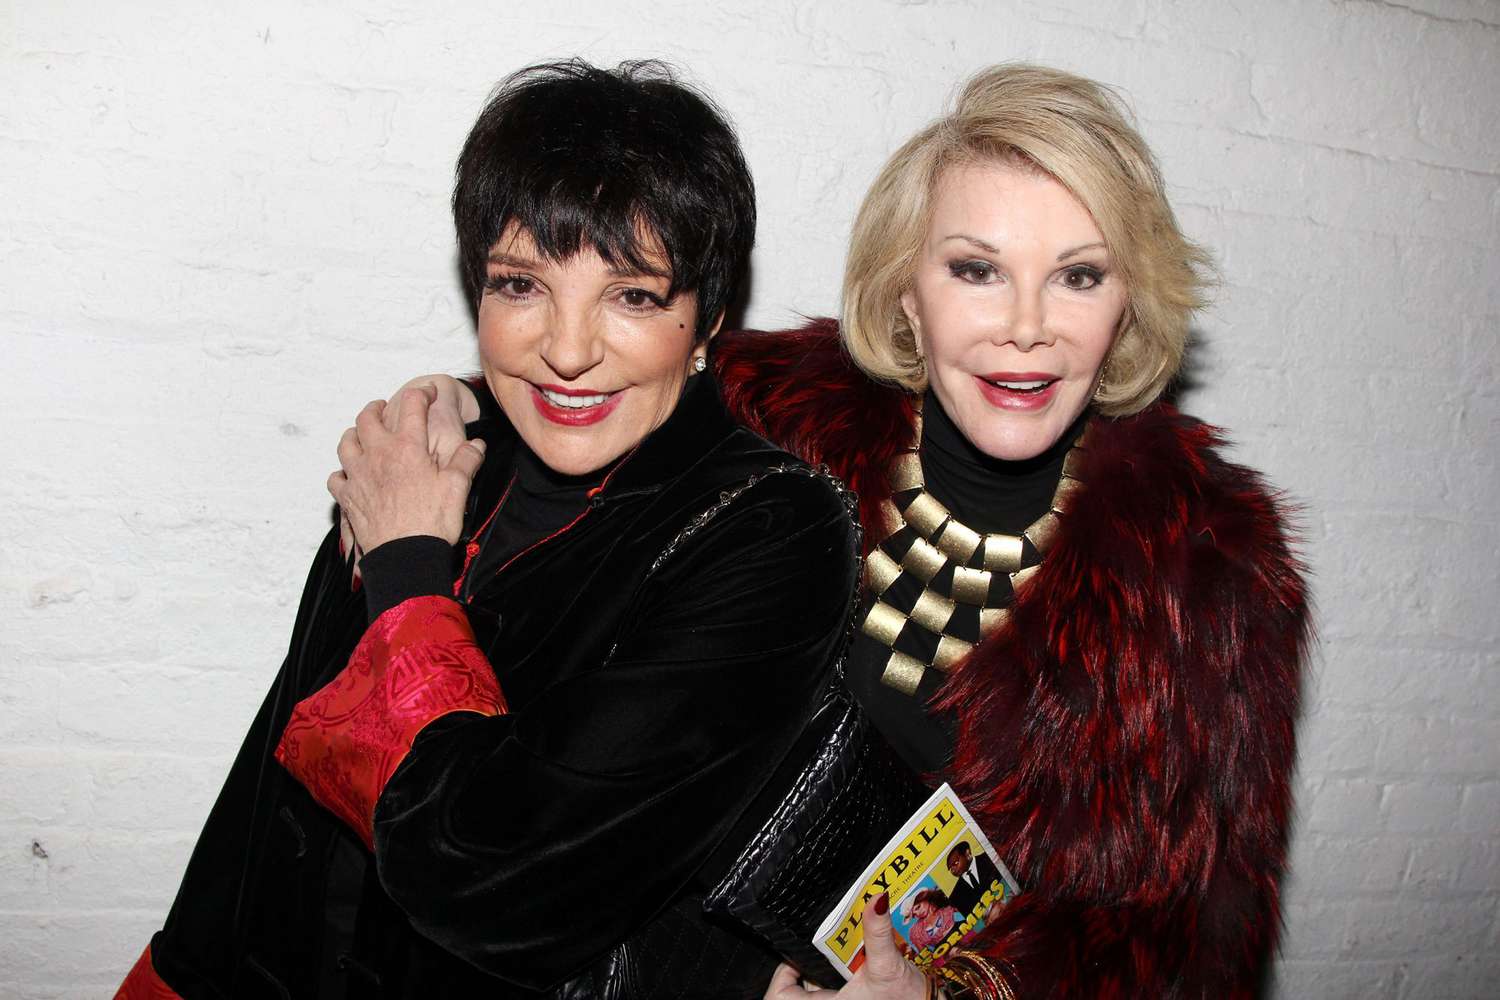 Liza Minnelli With&nbsp;Joan Rivers on Broadway in New York City on&nbsp;October 23, 2012